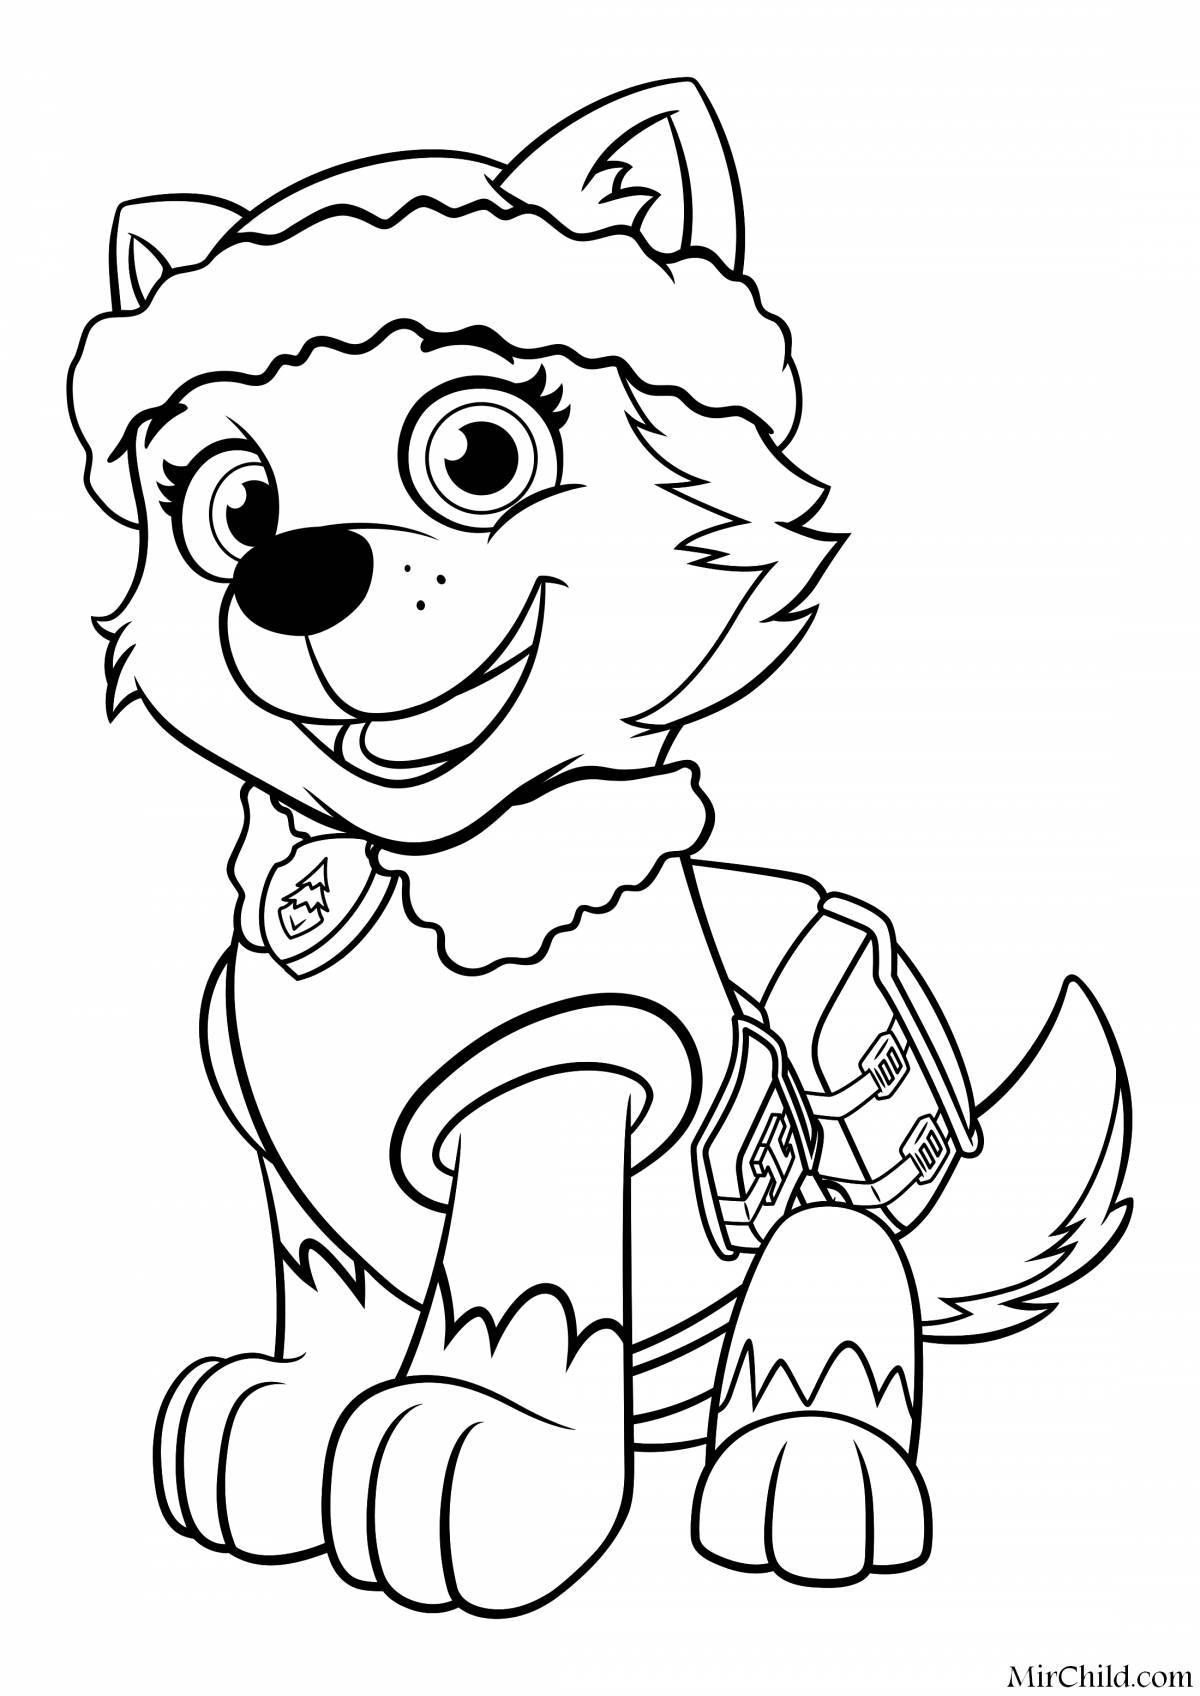 Amazing Paw Patrol coloring book for girls